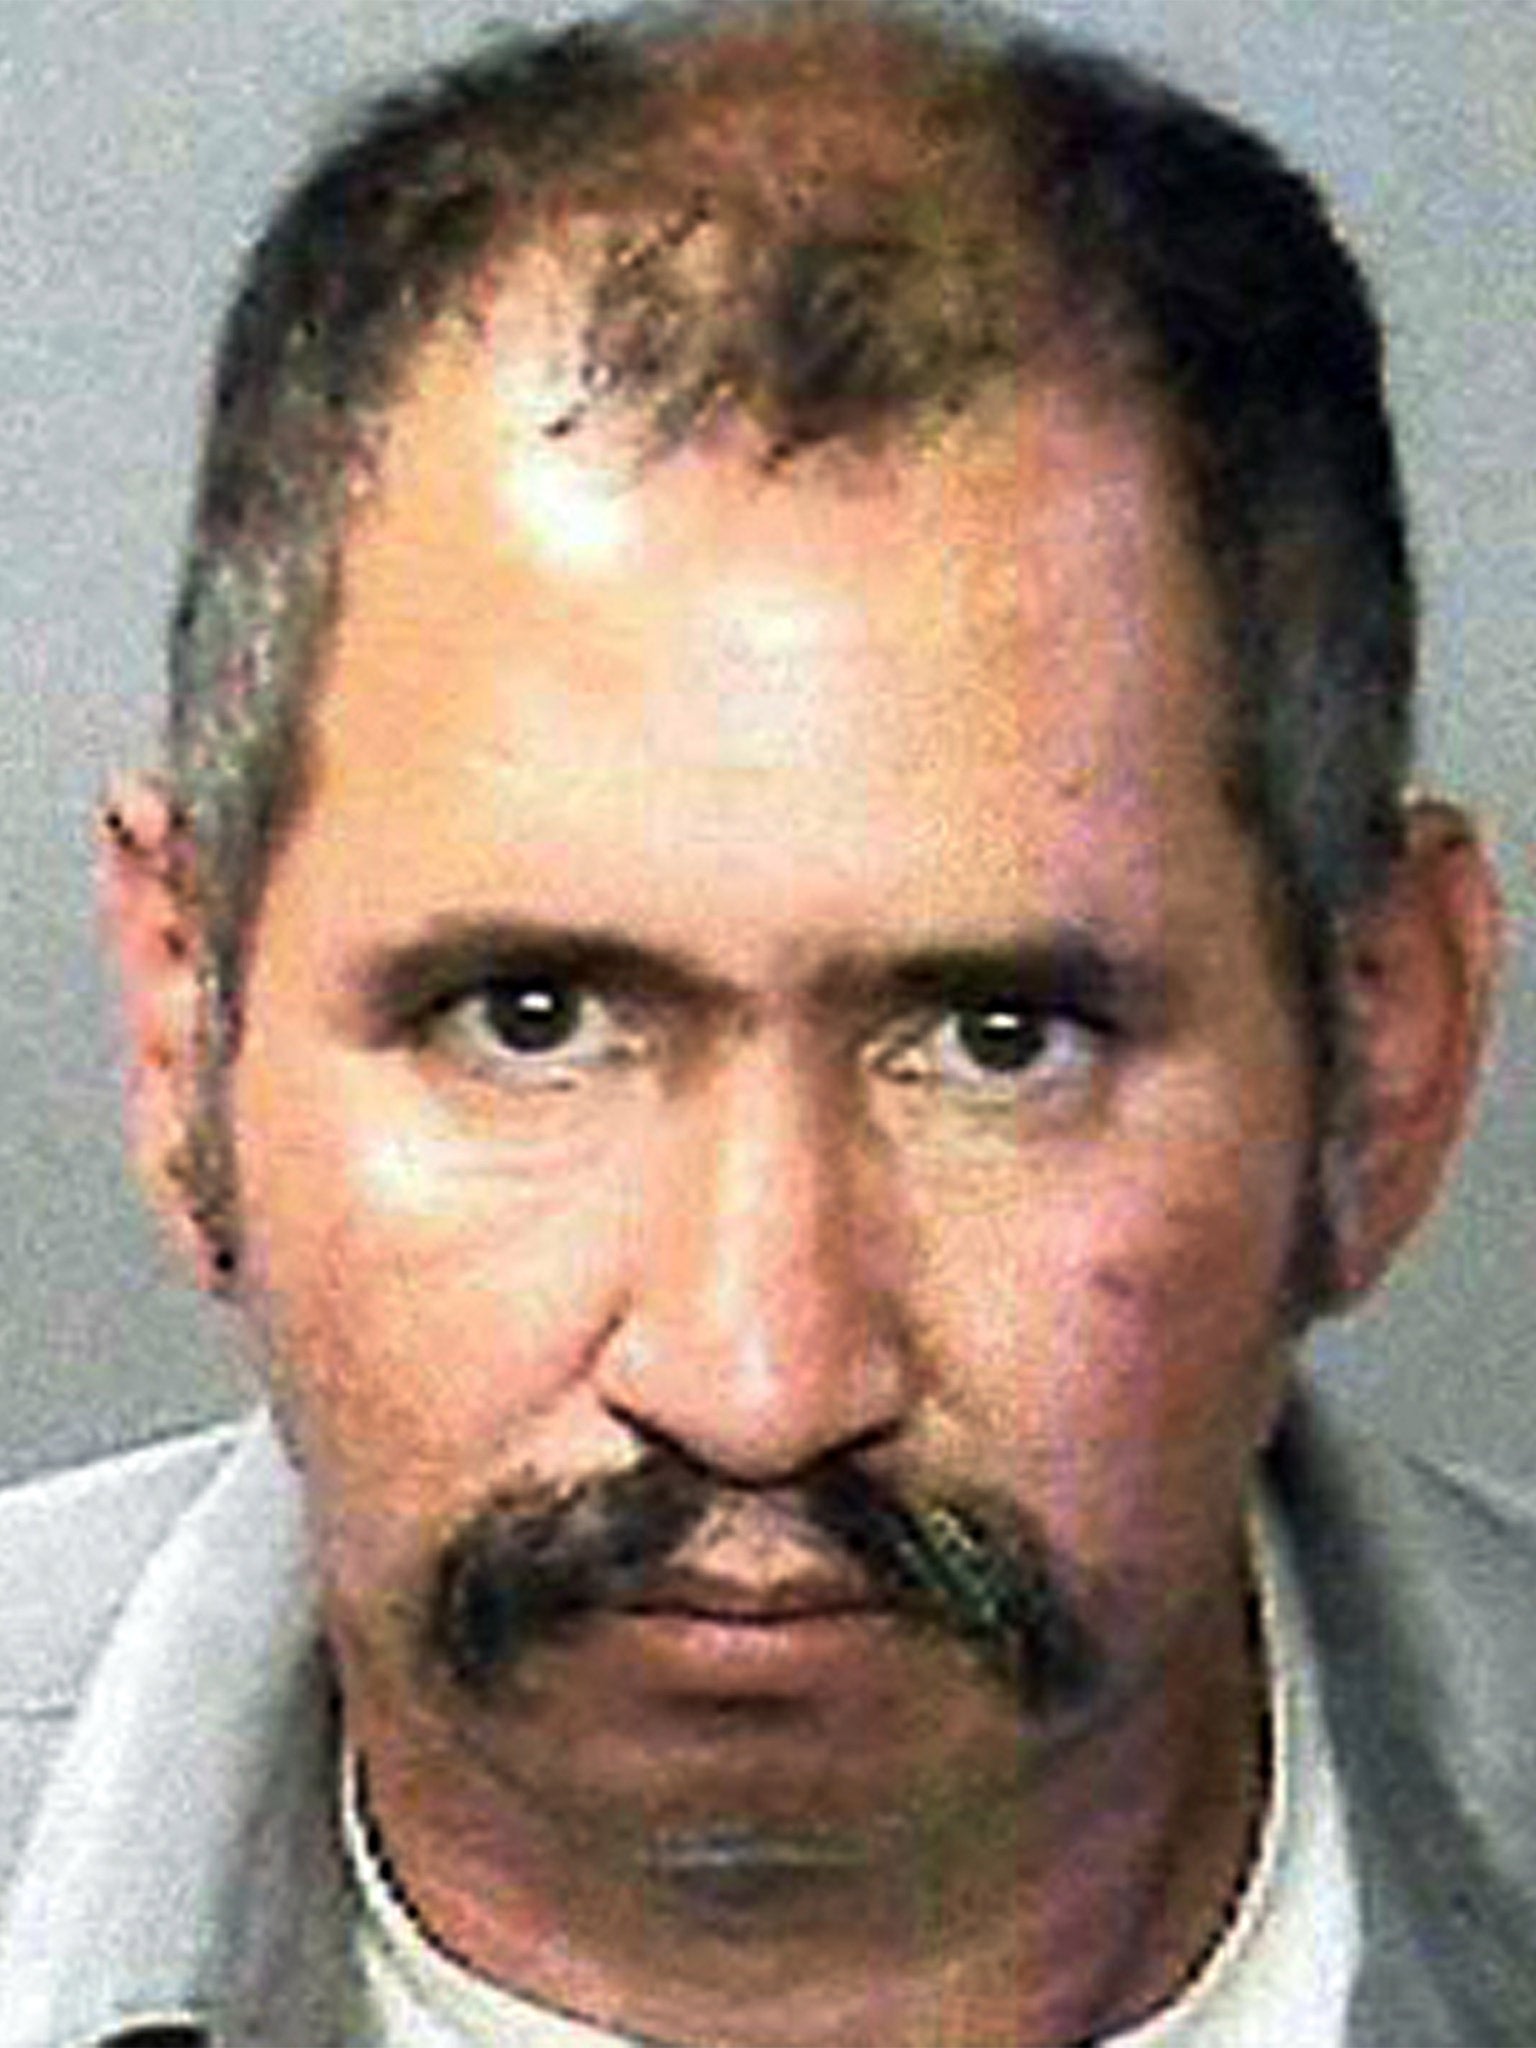 Jose Manuel Martinez has been charged with murdering nine people in three counties